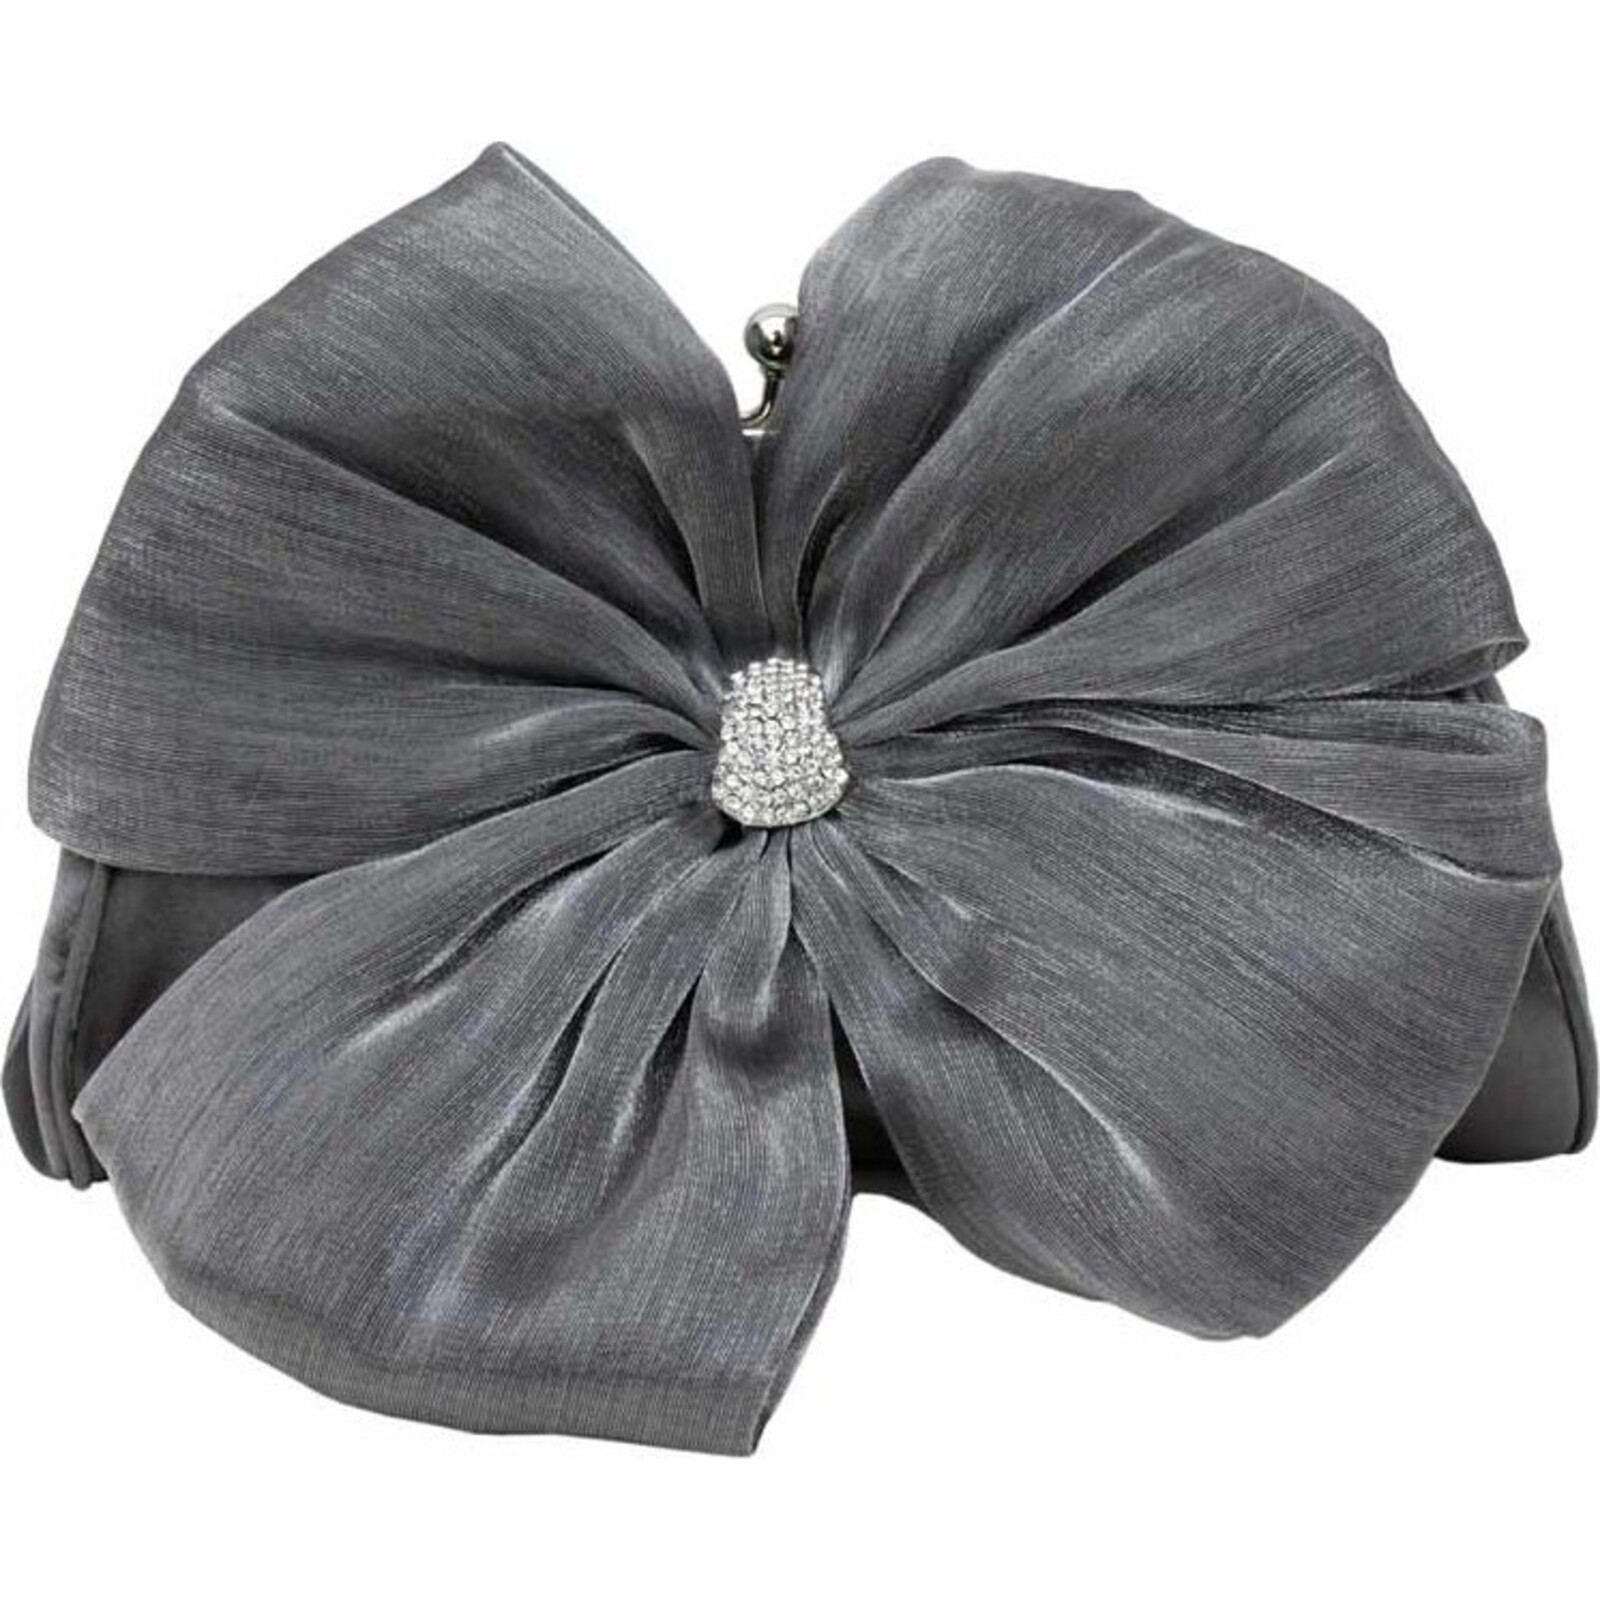 Evening Purse - Silver Bow 